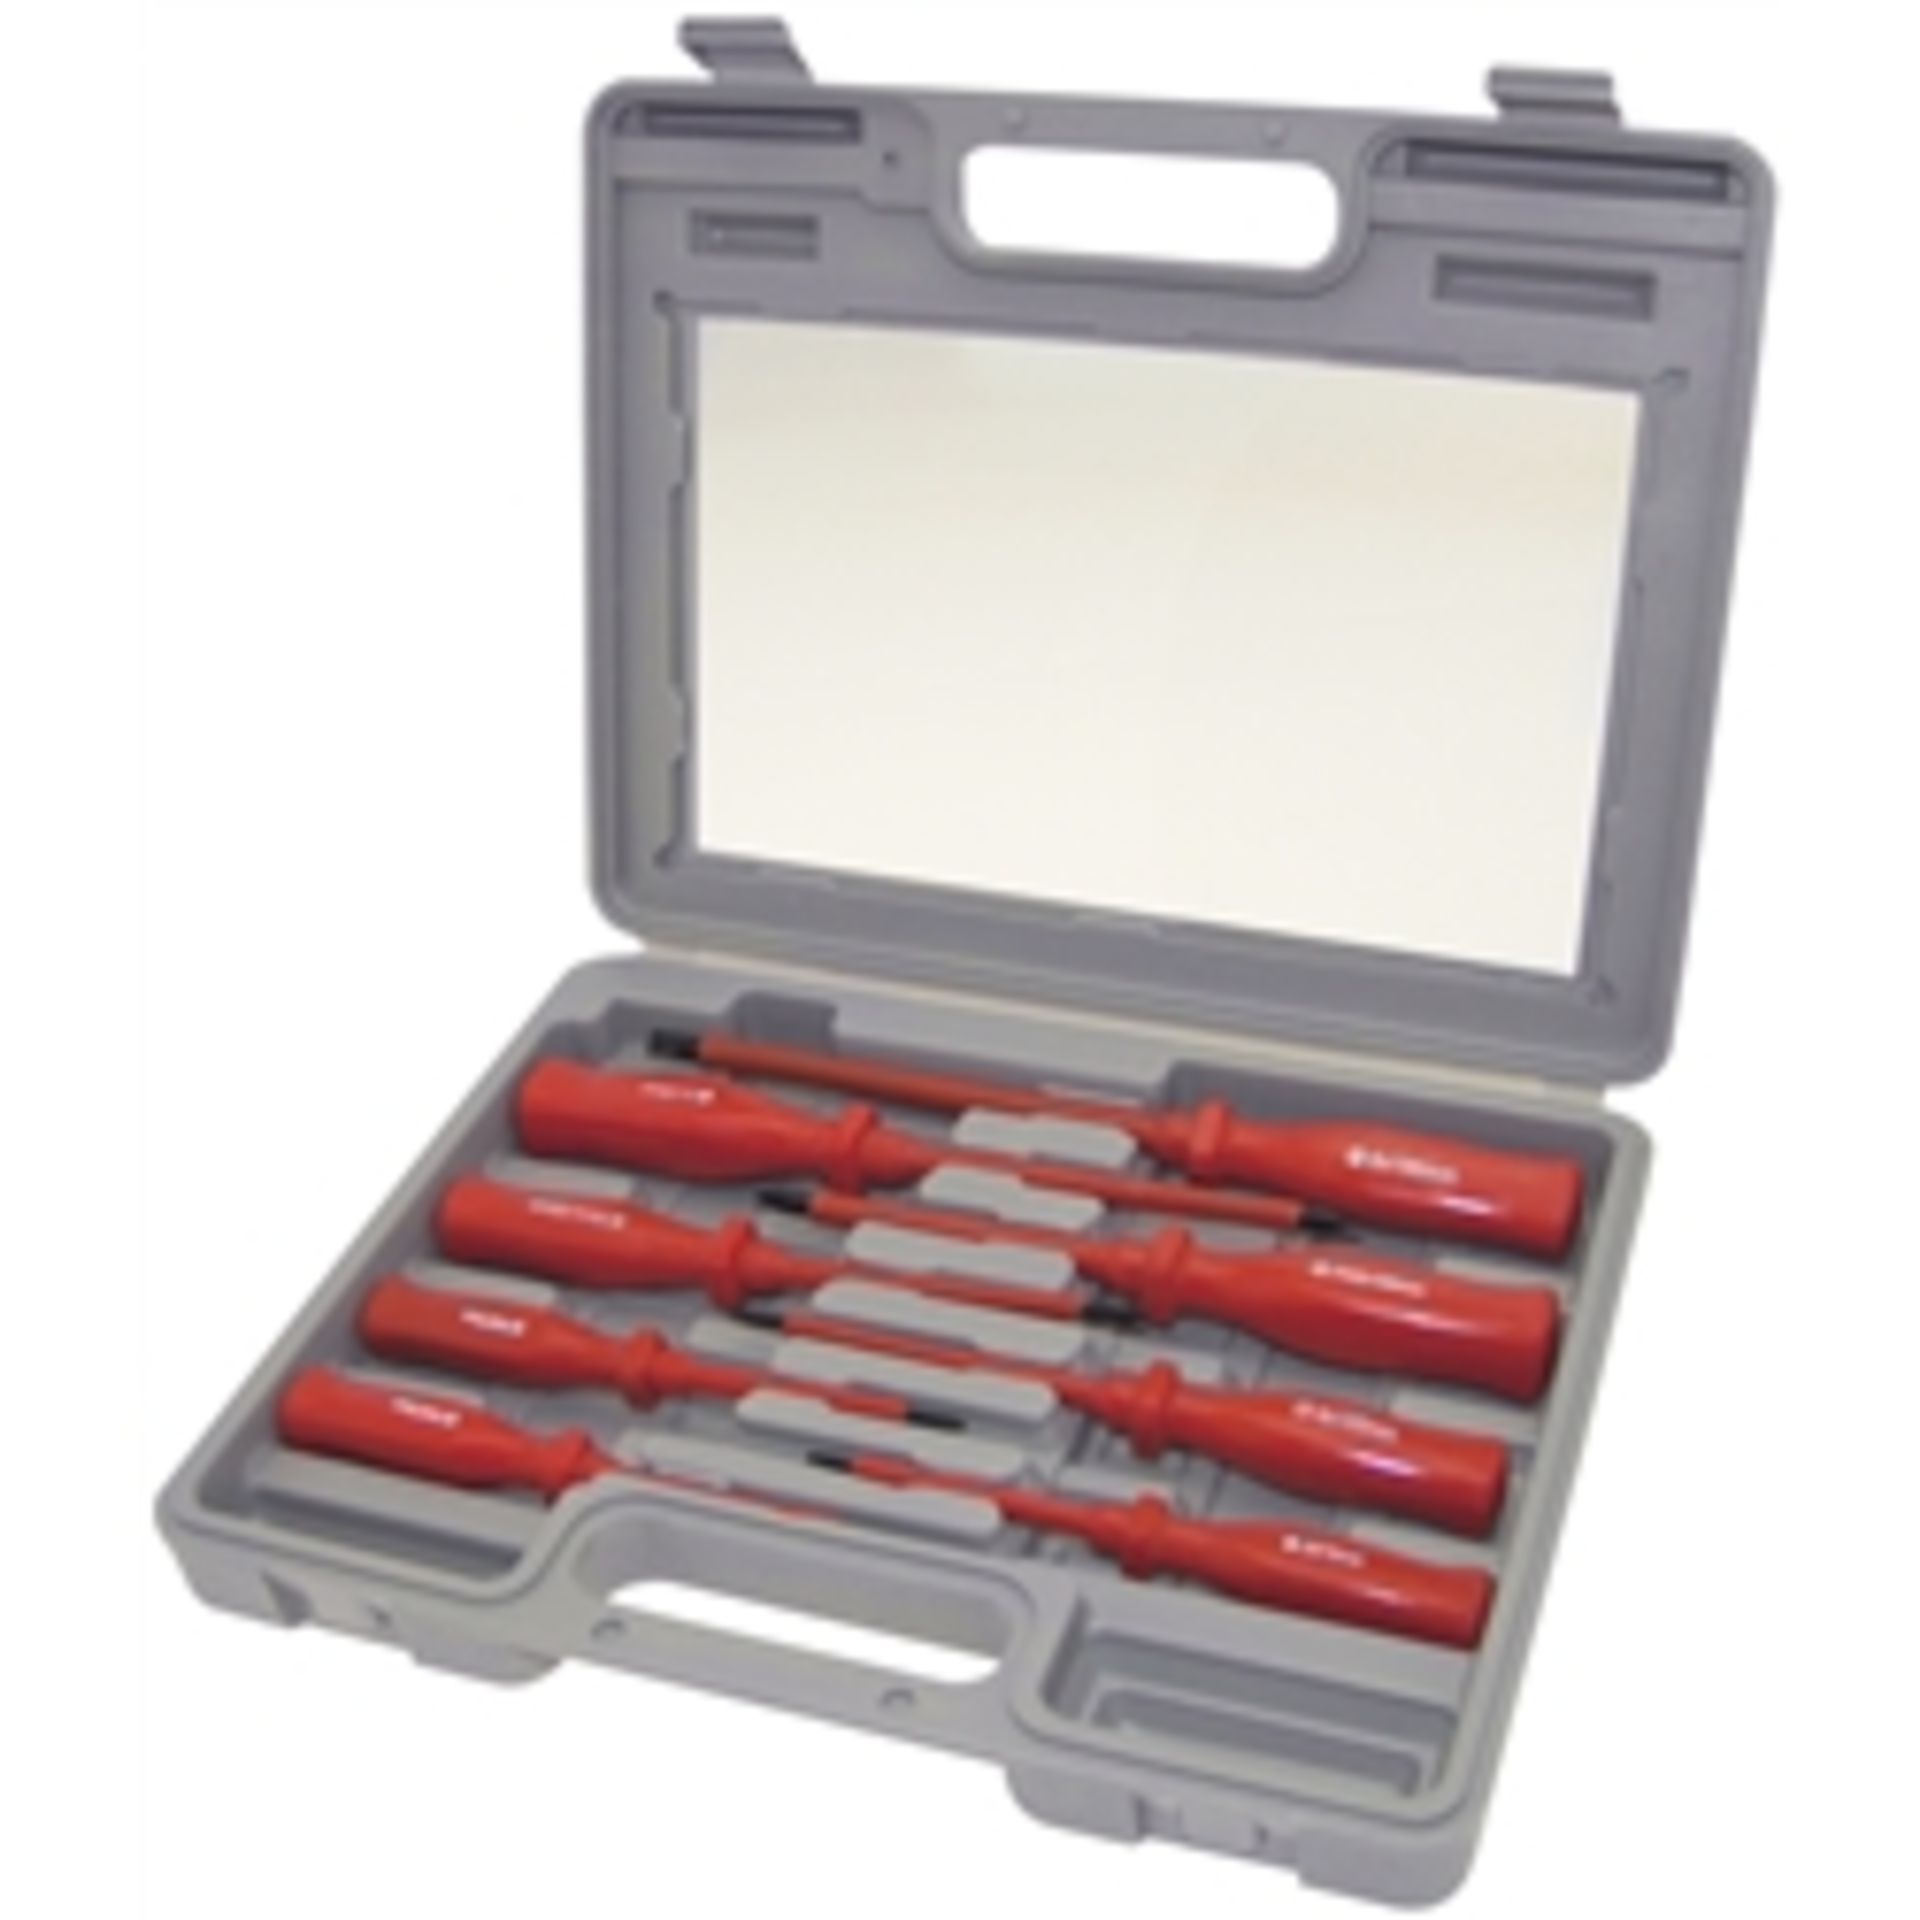 V *TRADE QTY* Brand New Eight Piece Screwdriver Set In Carry ase X 4 YOUR BID PRICE TO BE MULTIPLIED - Image 2 of 2